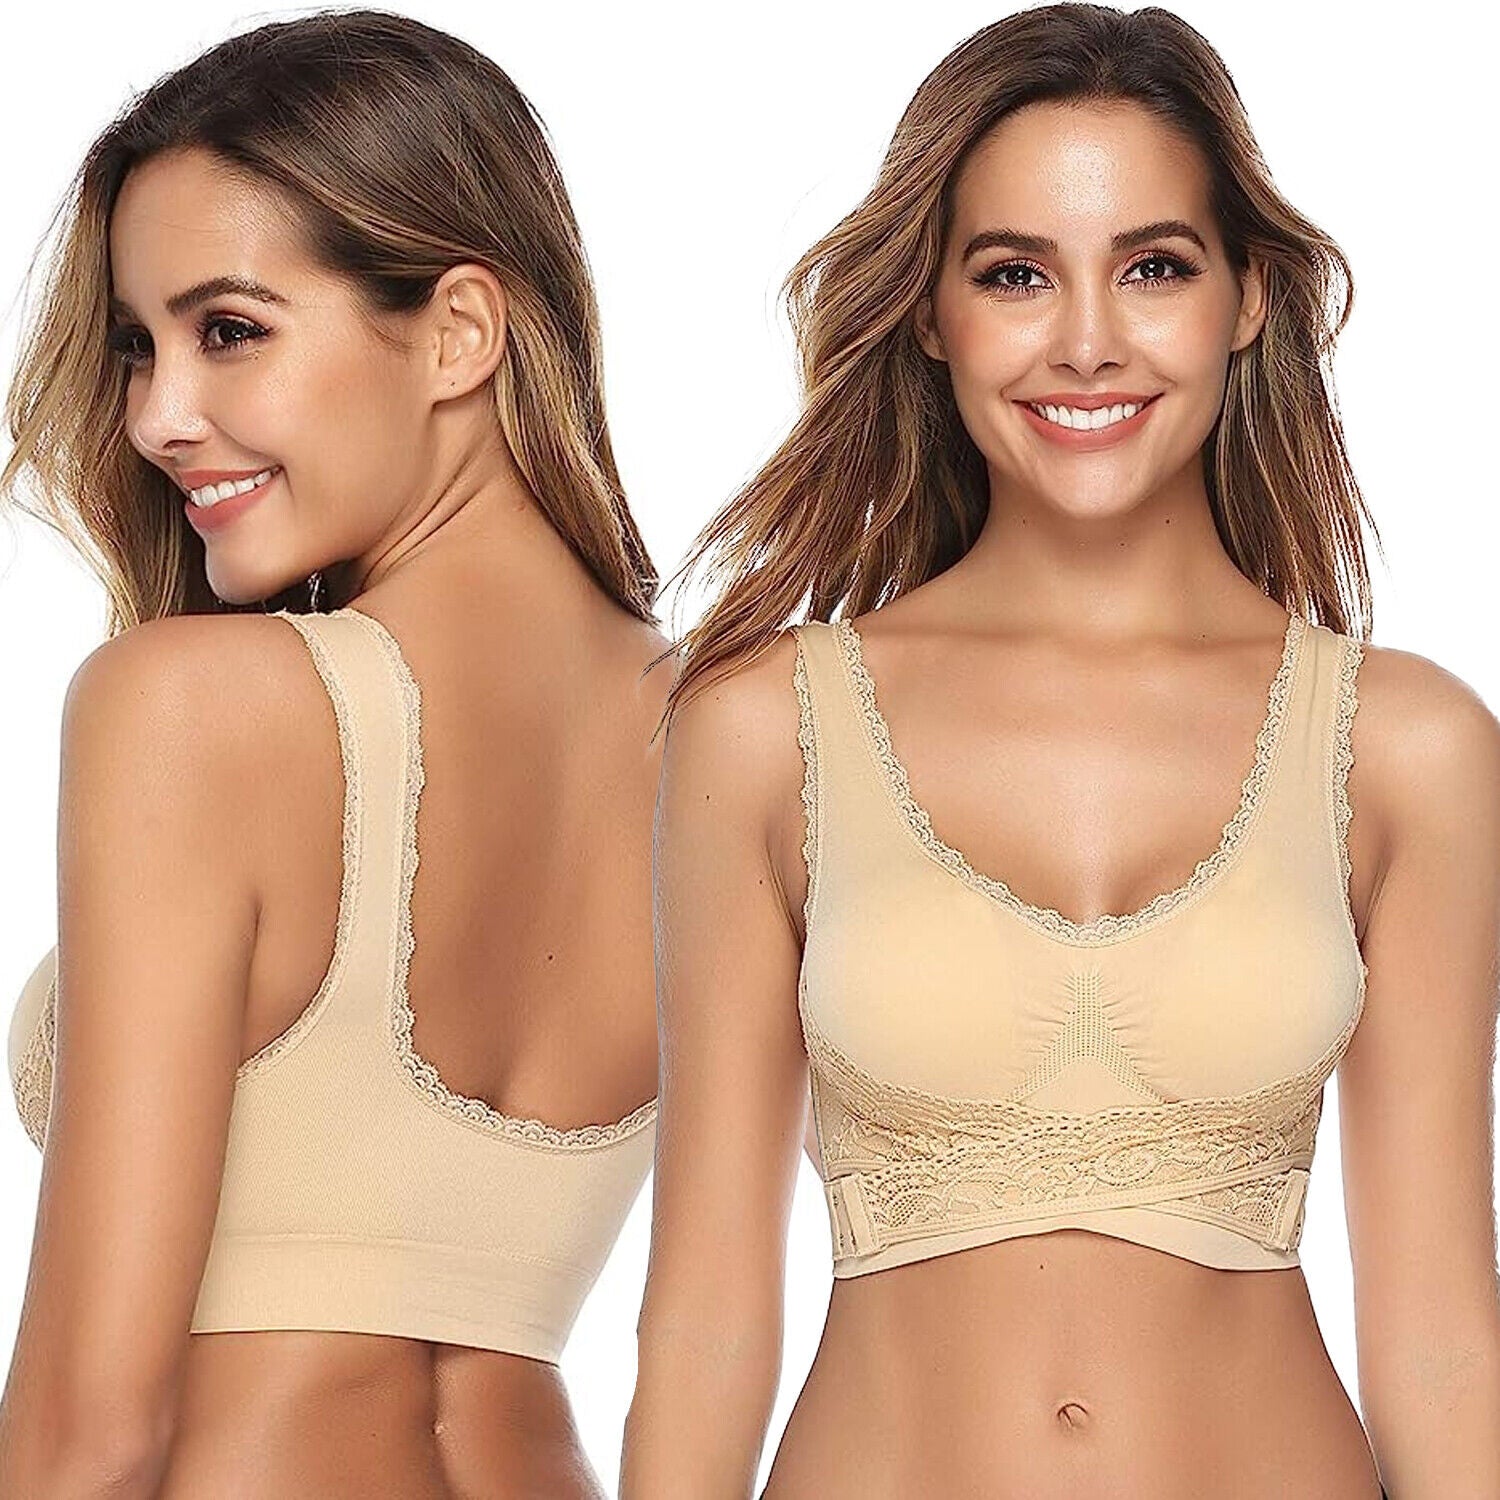 Women's Front Buckle Underwear Thin Style Gathered Without Steel Ring  Adjustable Large Chest Vest Style Bra 36c Bras for Women Push up 